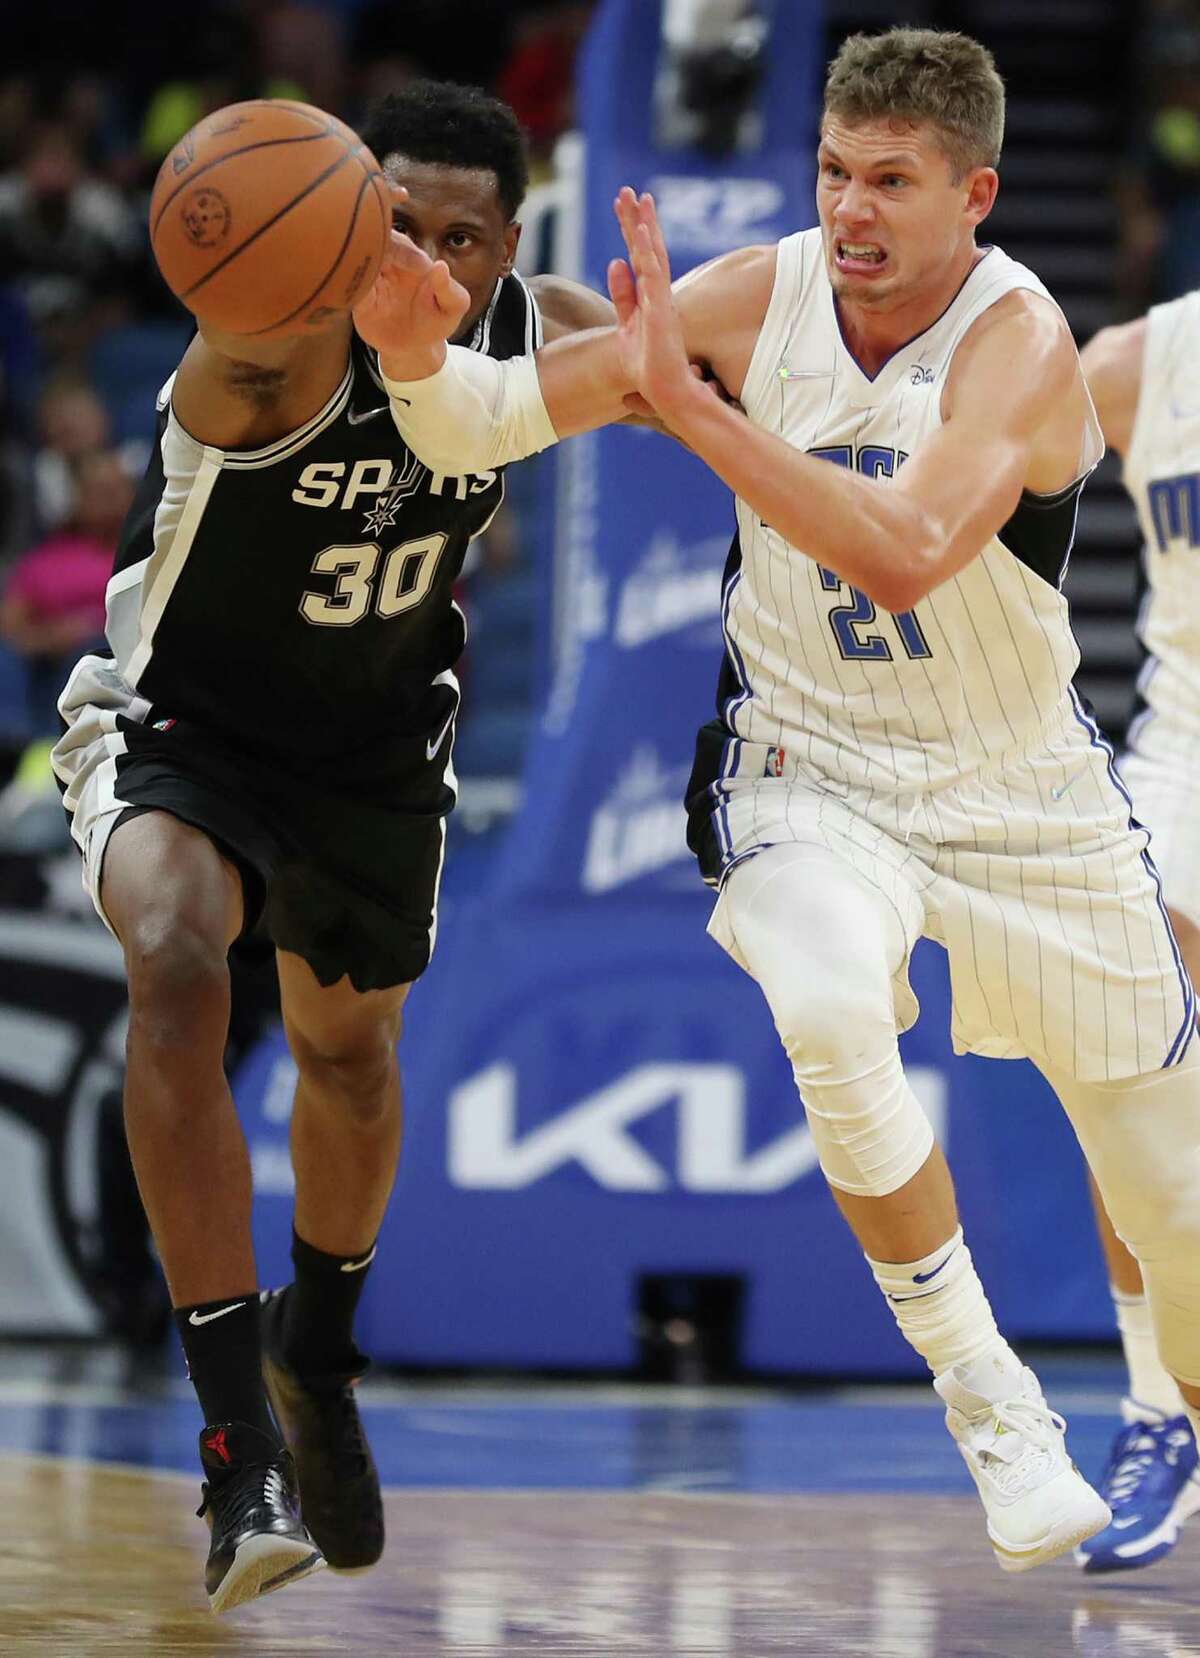 Orlando Magic center Moritz Wagner (21) and San Antonio Spurs forward Thaddeus Young (30) chase the ball during a preseason game at the Amway Center on Sunday, Oct. 10, 2021 in Orlando, Florida. San Antonio won the game 101-100. (Stephen M. Dowell/Orlando Sentinel/TNS)